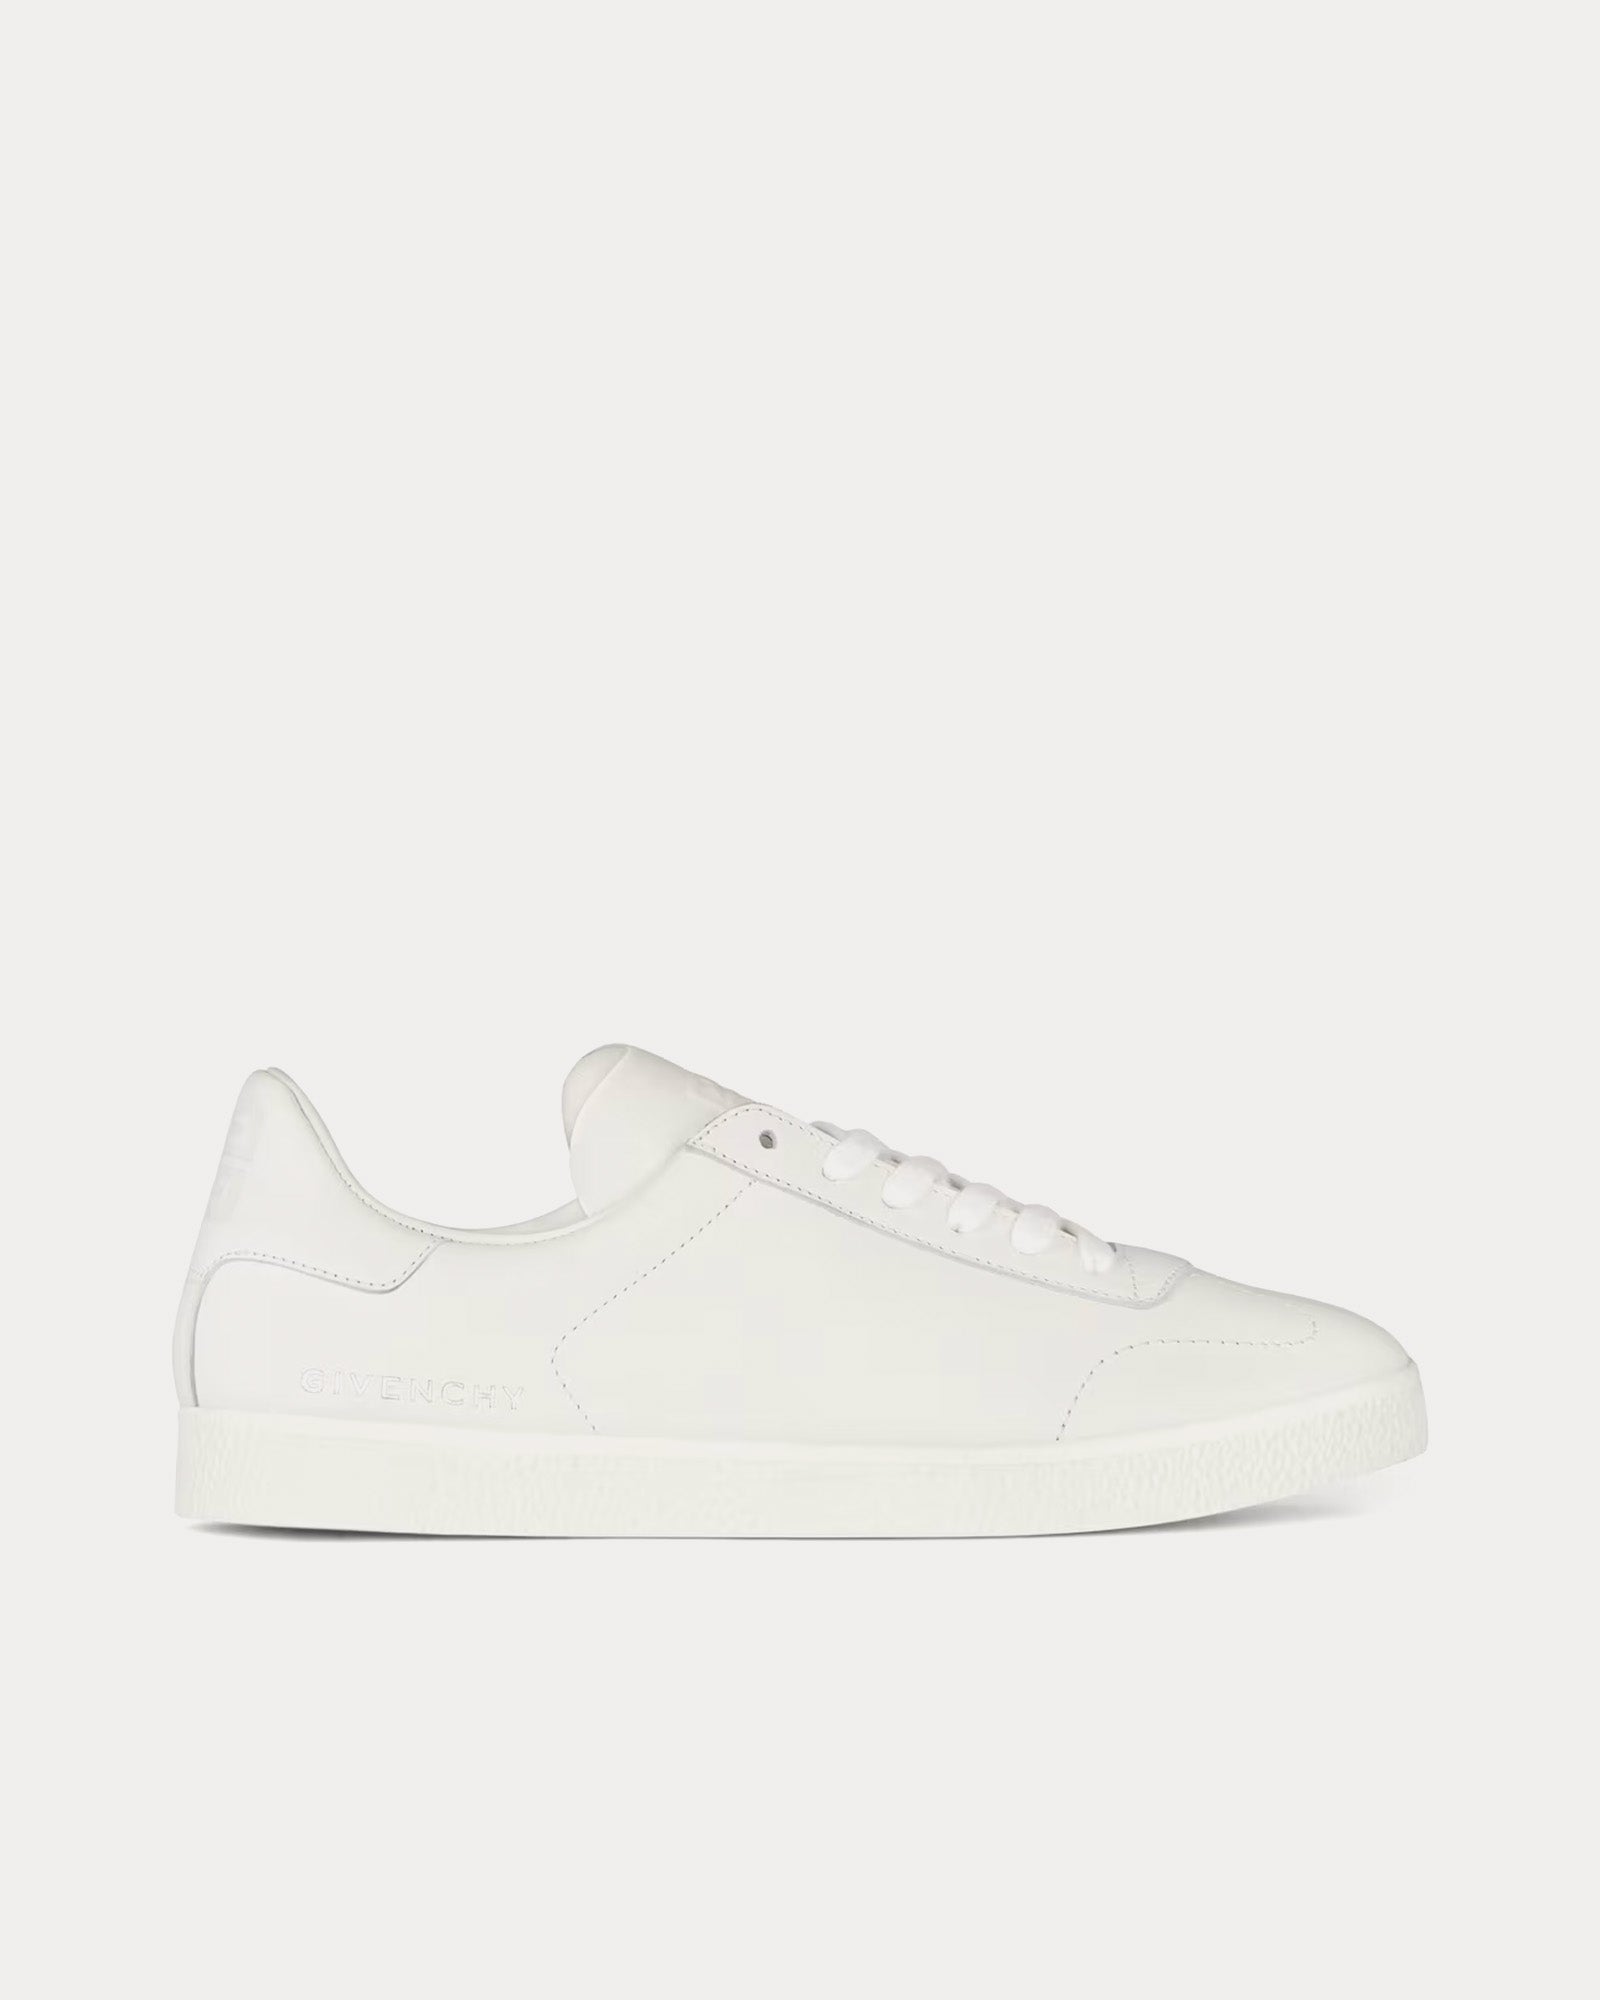 Givenchy - Town Leather White Low Top Sneakers